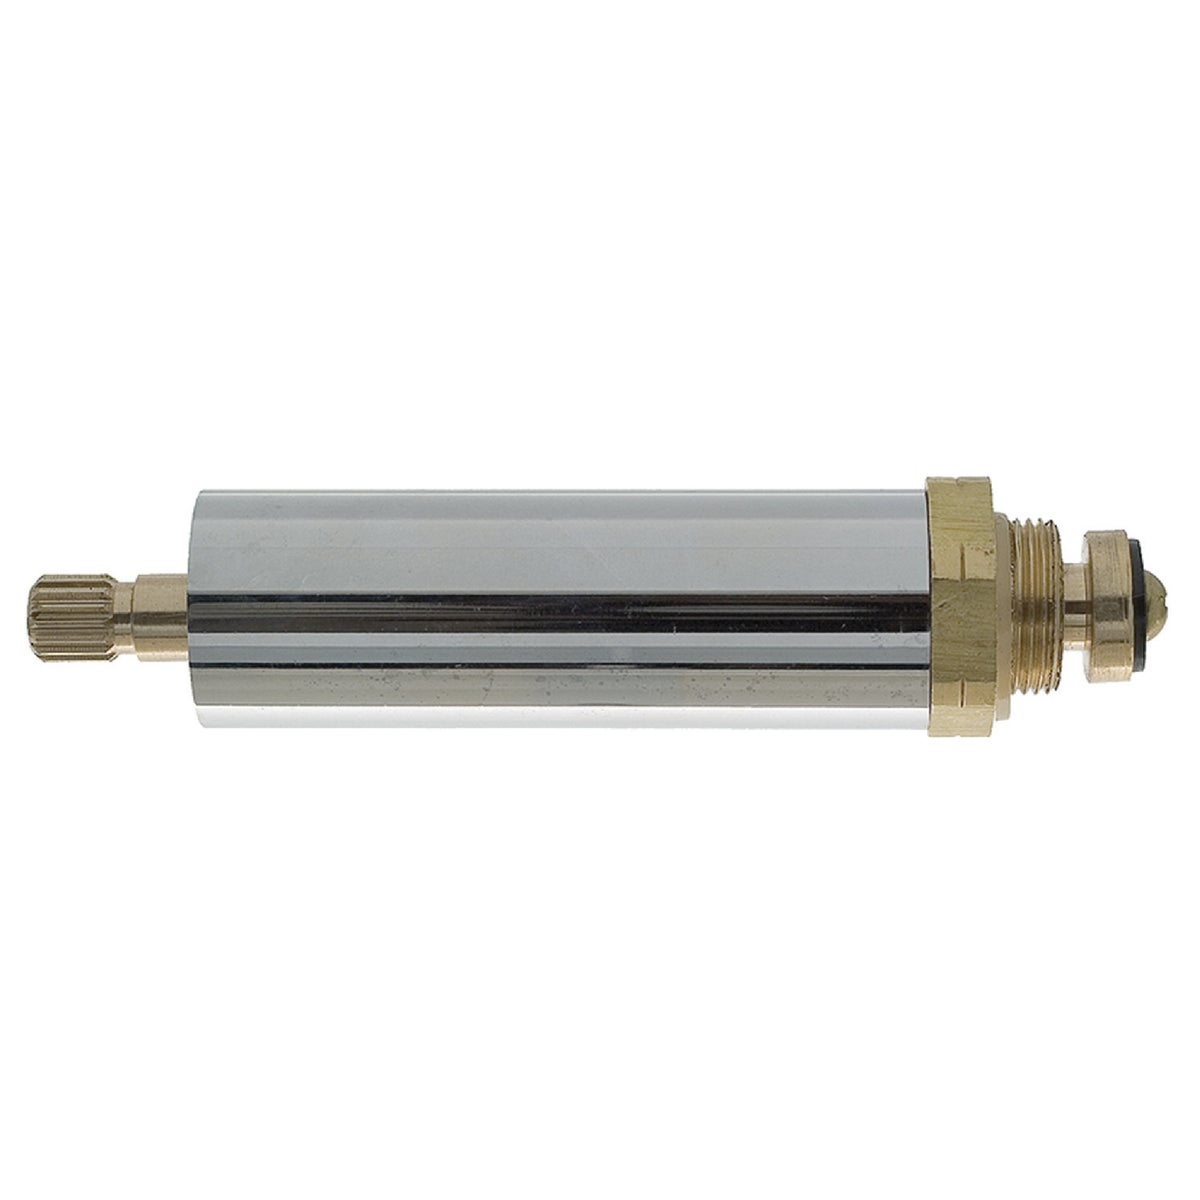 Item 404457, Install this Danco 10C-5H Hot Stem for Eljer to fix your leaky faucet.